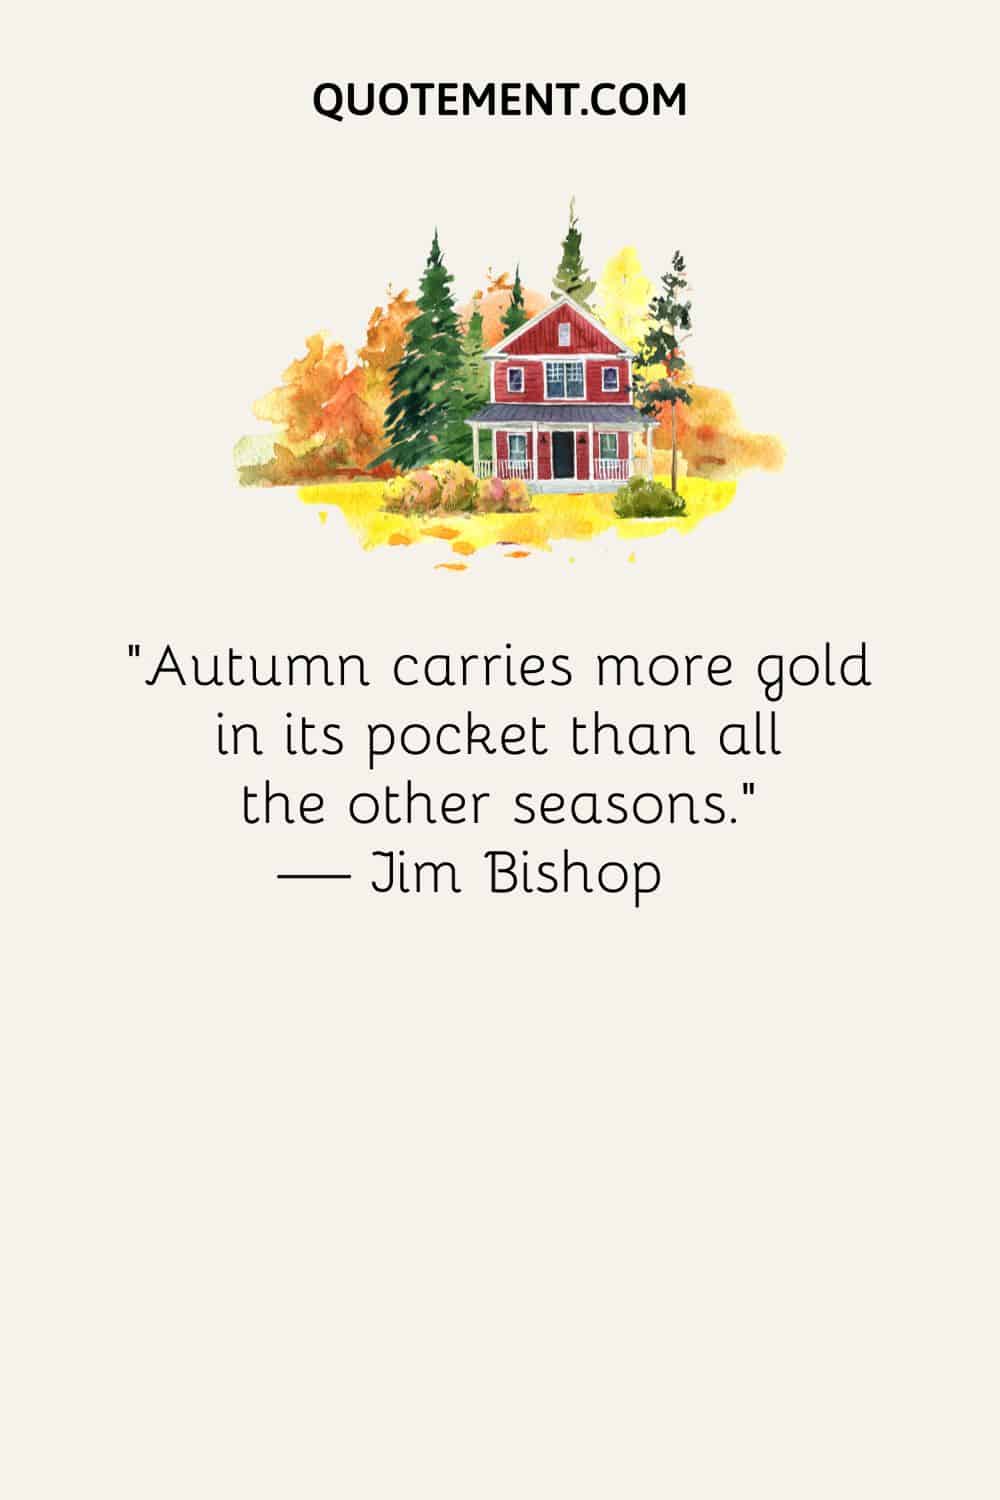 “Autumn carries more gold in its pocket than all the other seasons.” — Jim Bishop